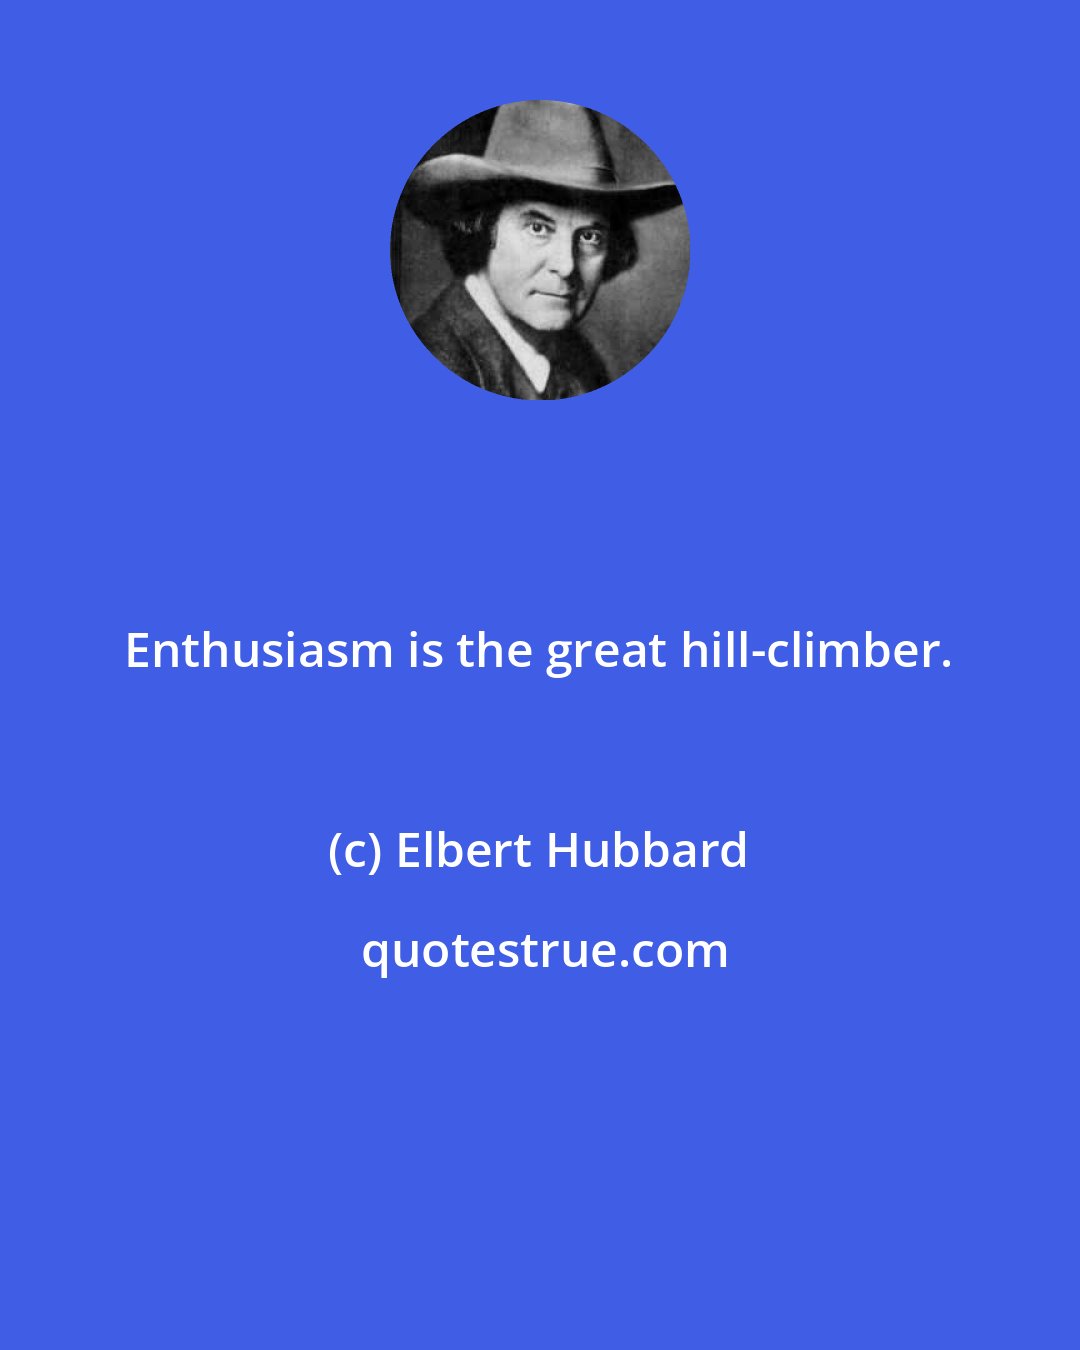 Elbert Hubbard: Enthusiasm is the great hill-climber.